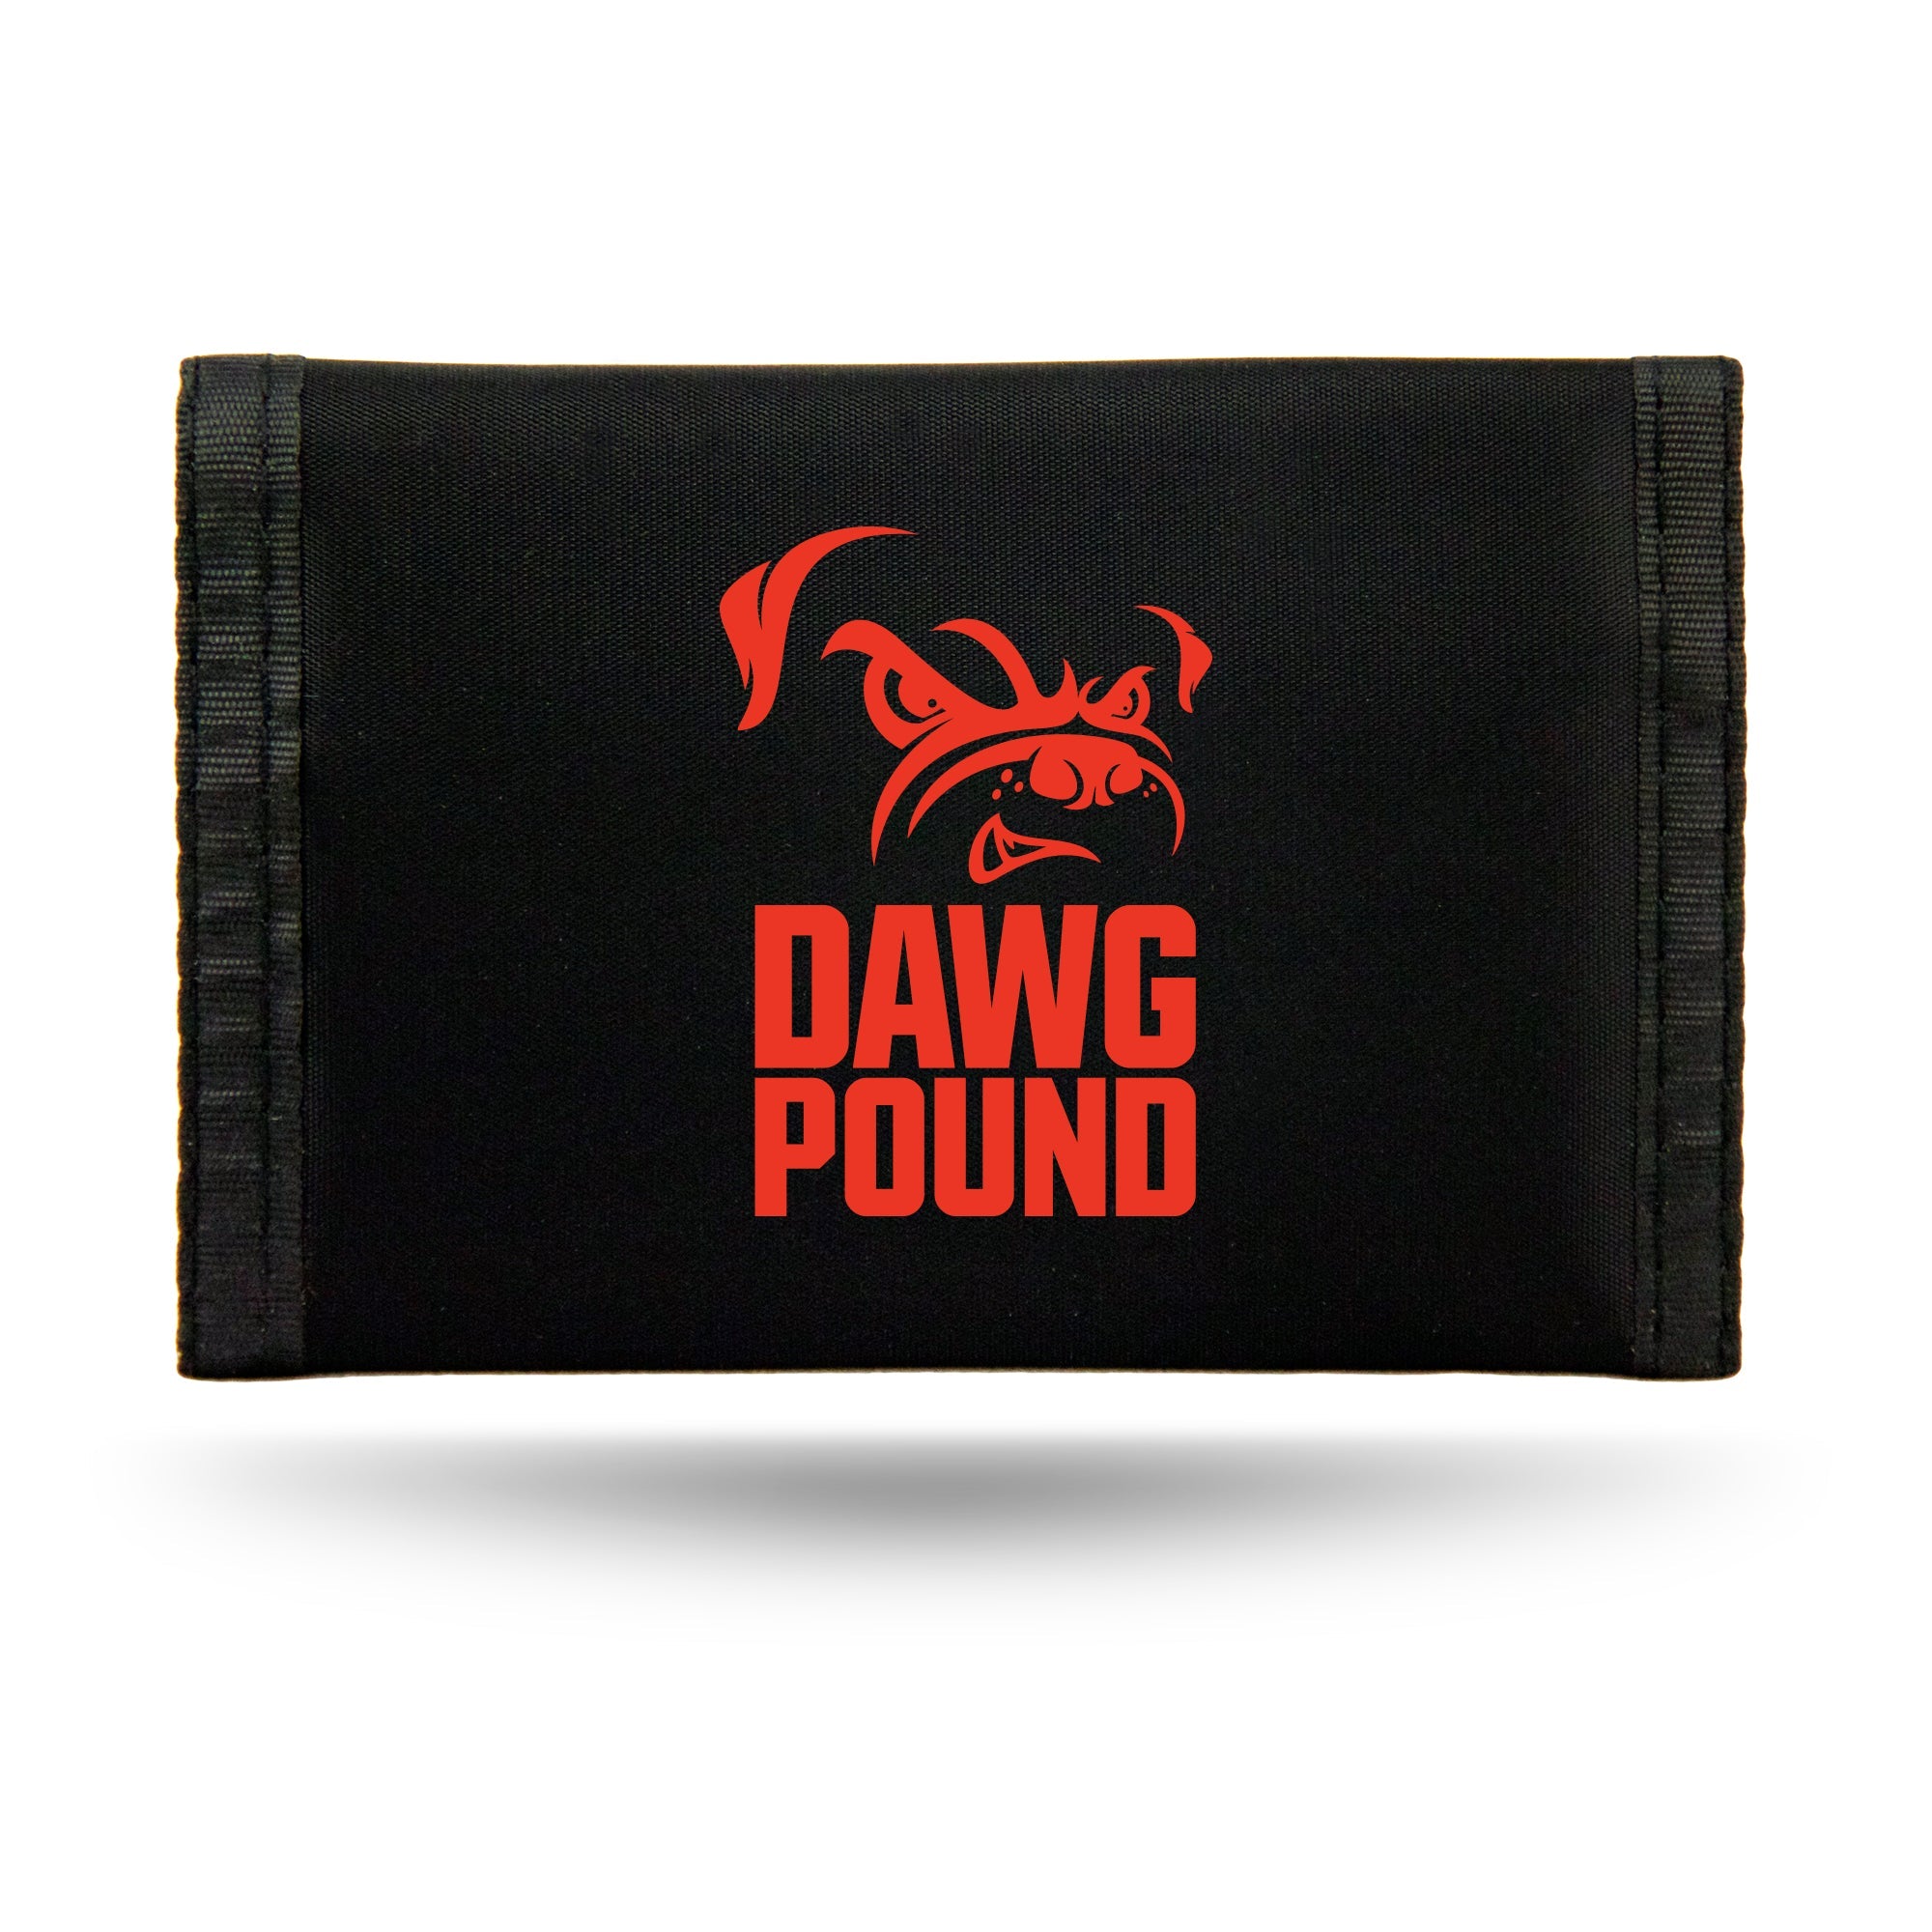 Cleveland Browns "Dawg Pound" Nyln Trfld